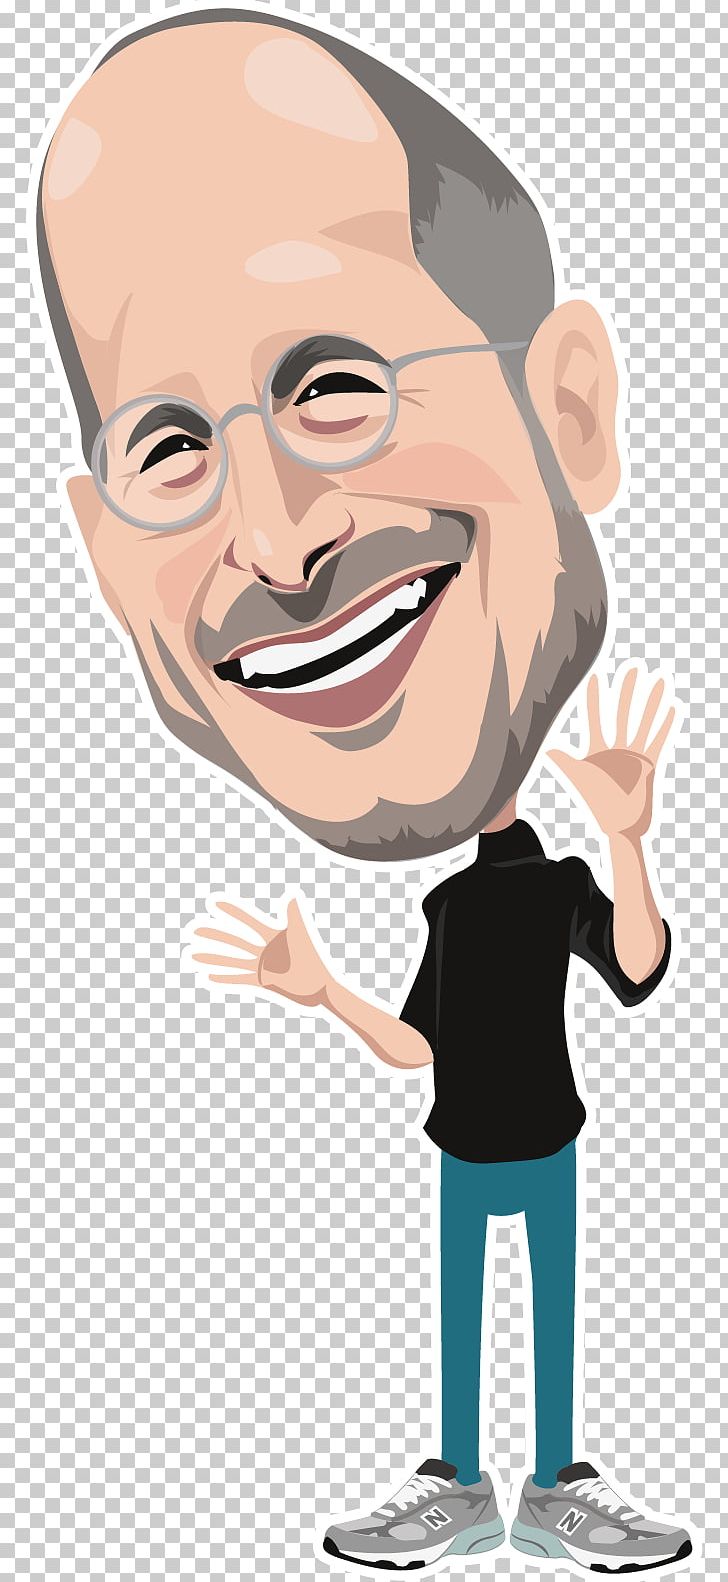 Steve Jobs Apple Cartoon Facial Expression PNG, Clipart, Apple, Celebrities, Cheek, Chief Executive, Chin Free PNG Download